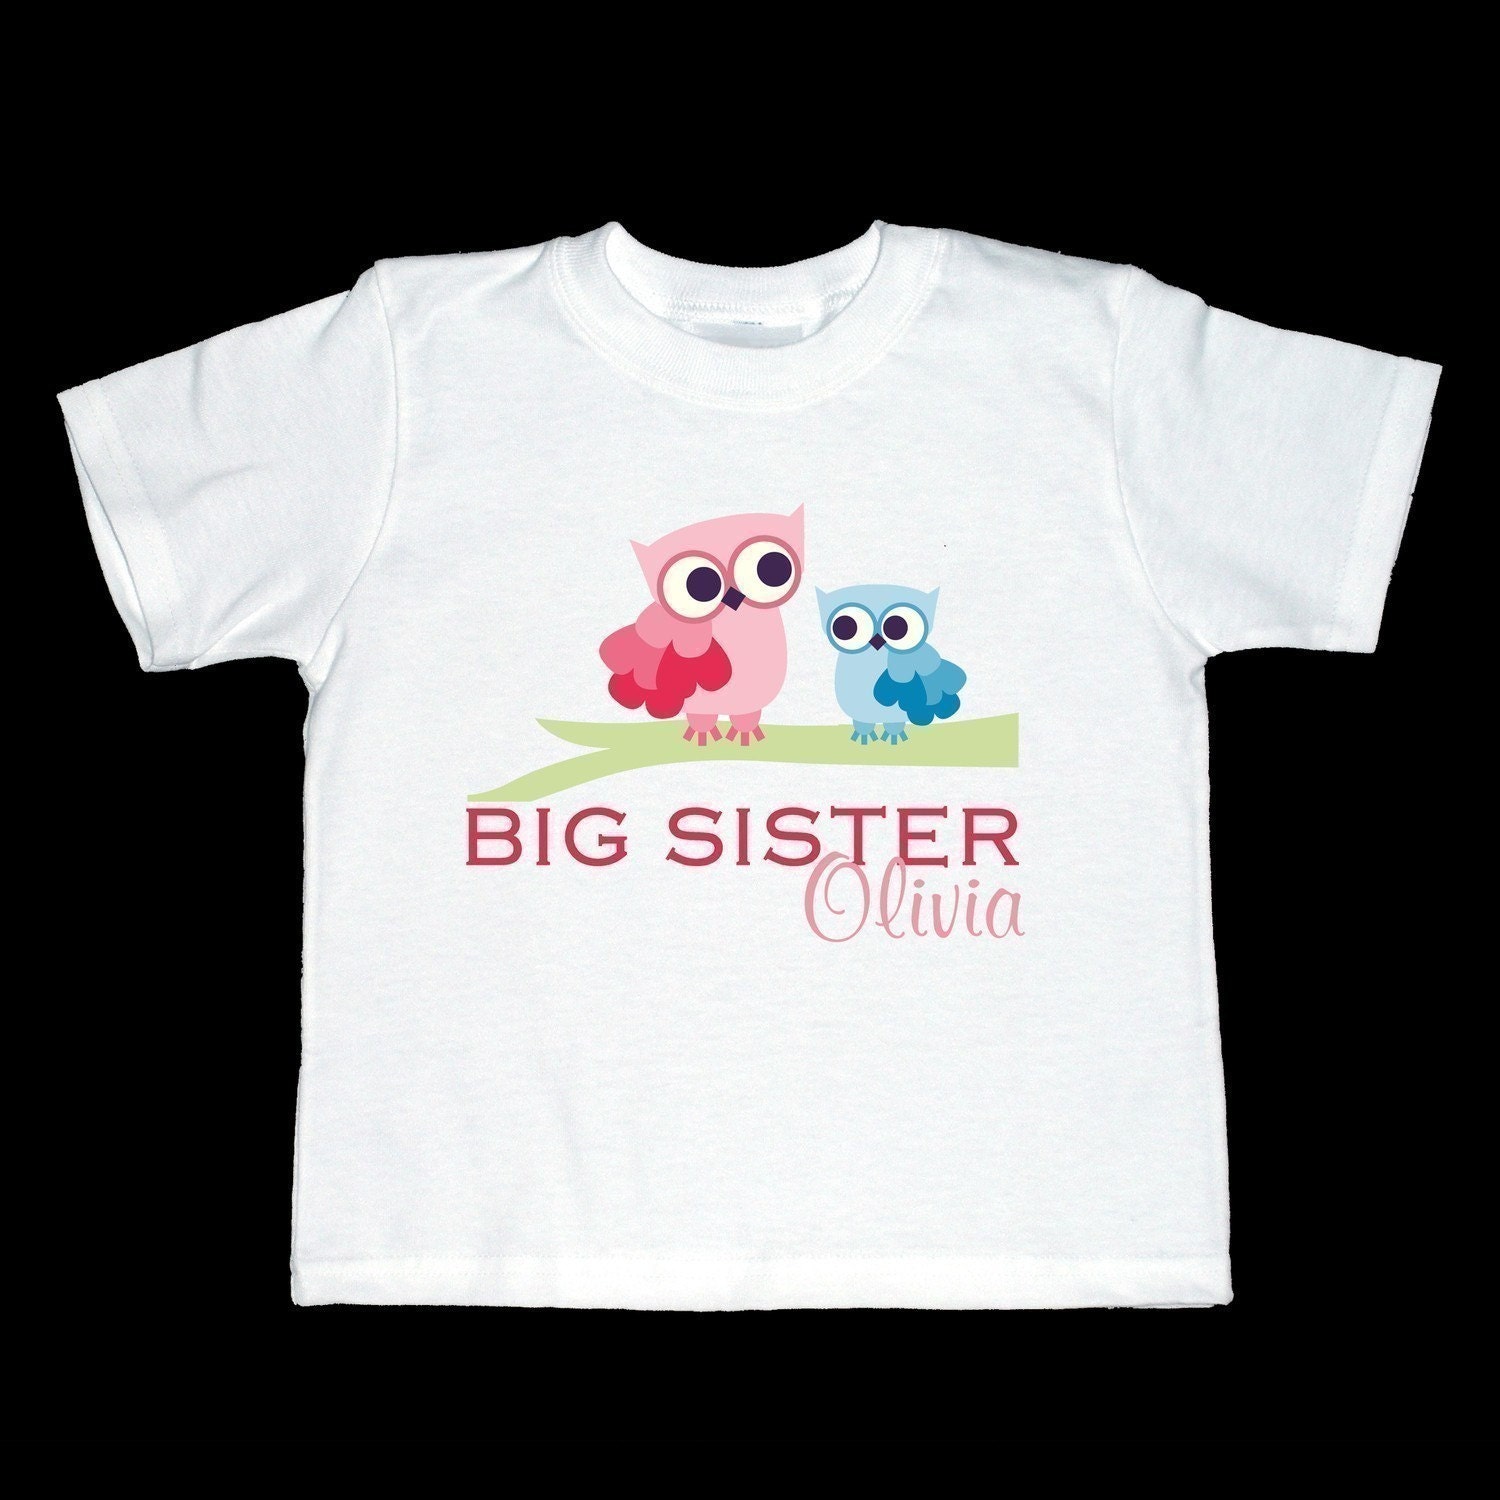 Adorable Owl Big Sister Shirt Personalized with your